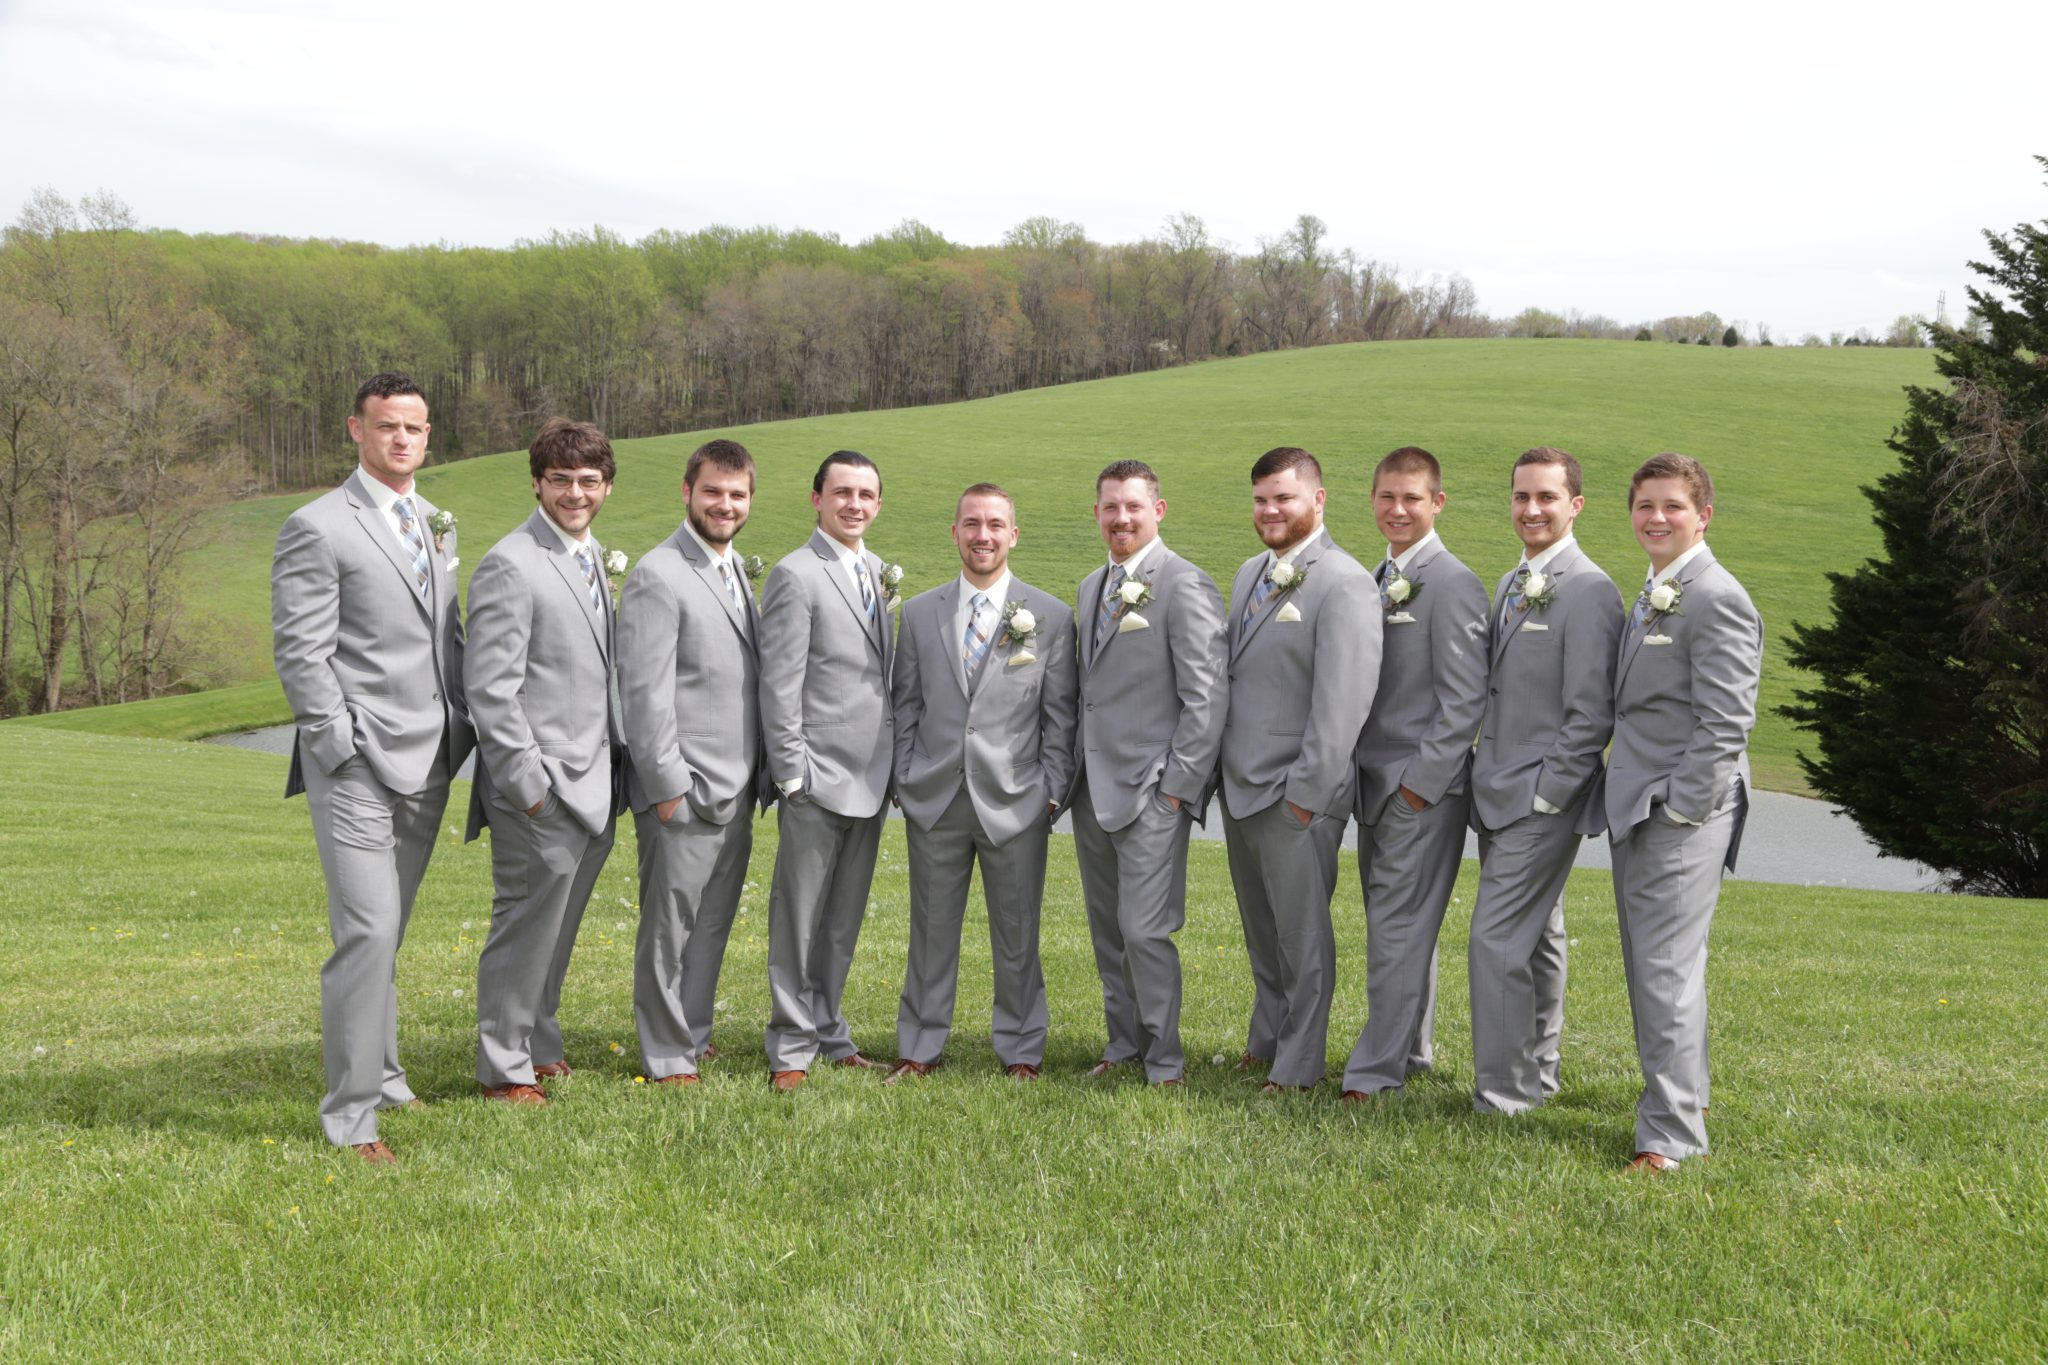 Groomsmen posed for photos on back lawn